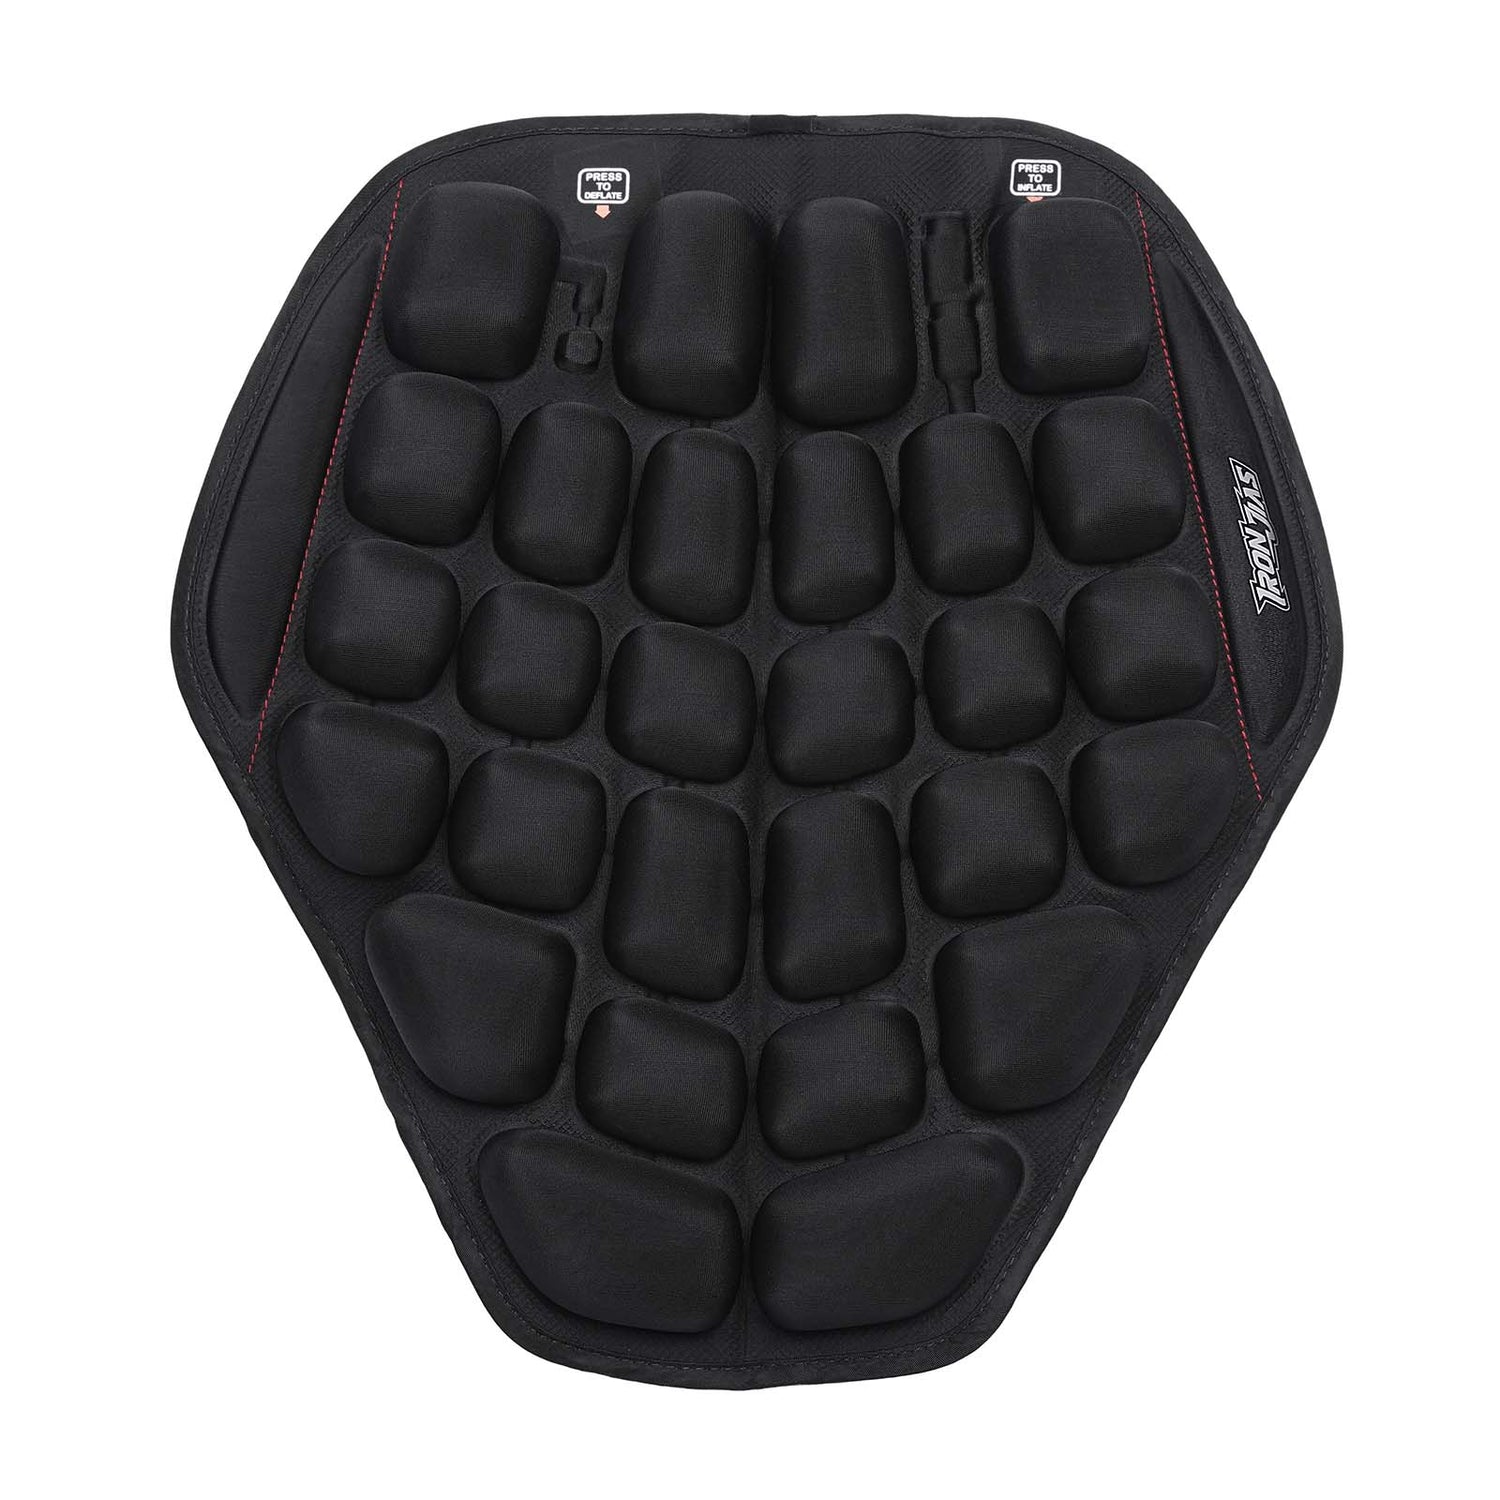 Jytue Motorcycle Seat Cushion Cover Motorbike Cool Seat Cushion Pad Adjustable 3D Breathable Mesh Motorbike Seat Pad Anti-Slip Quick-drying Protective